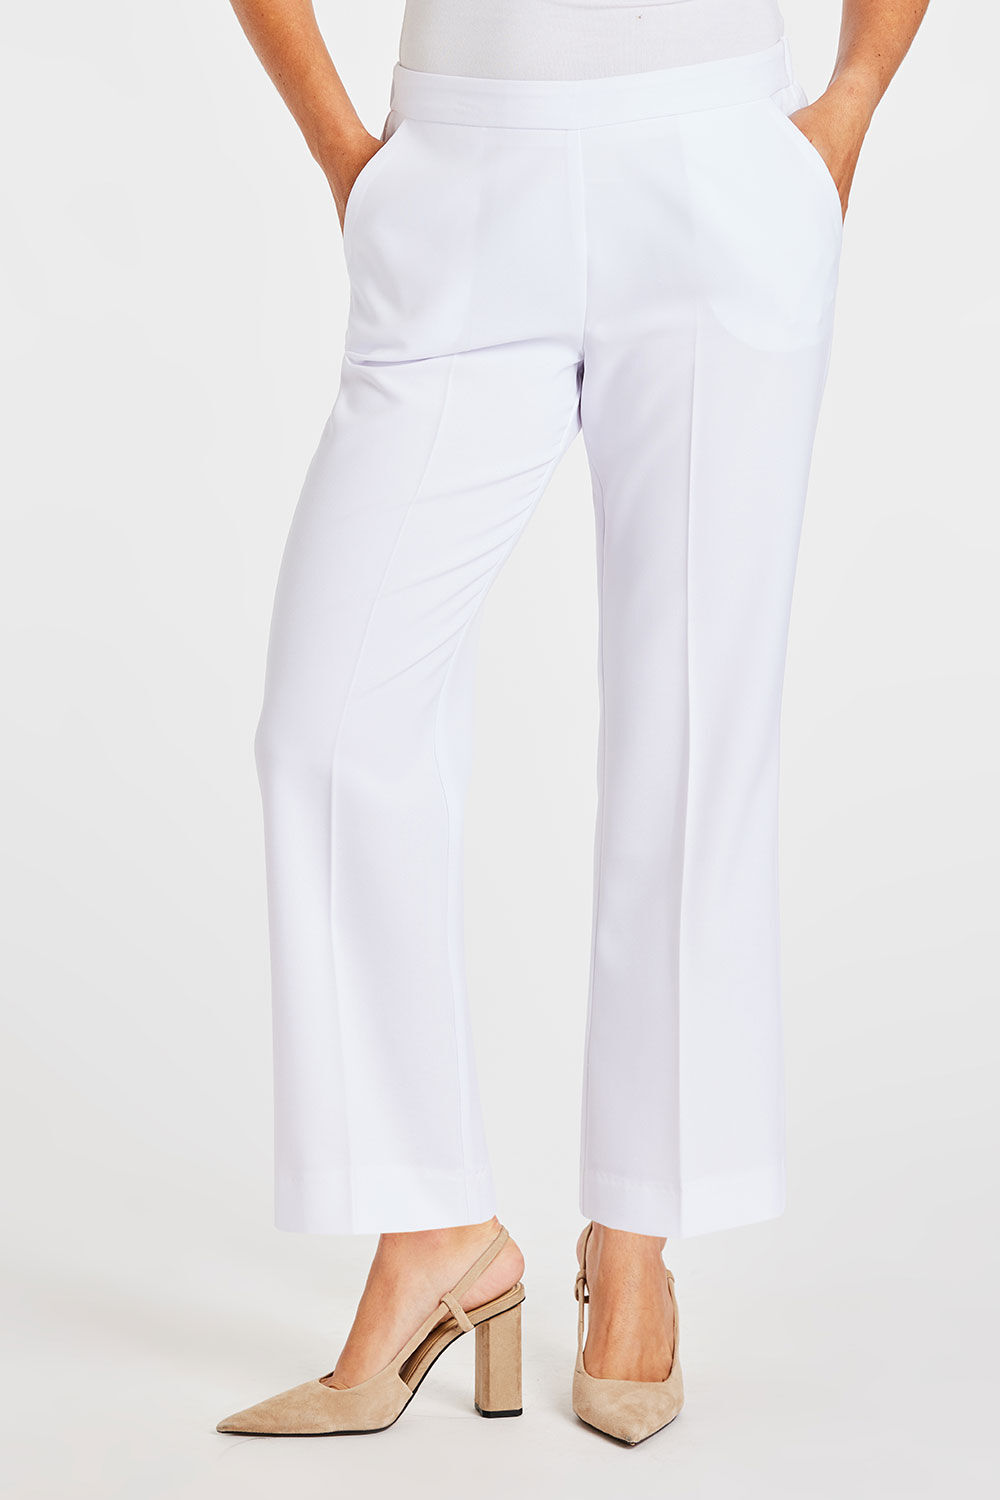 Bonmarche White Straight Leg Elasticated Pull On Trousers